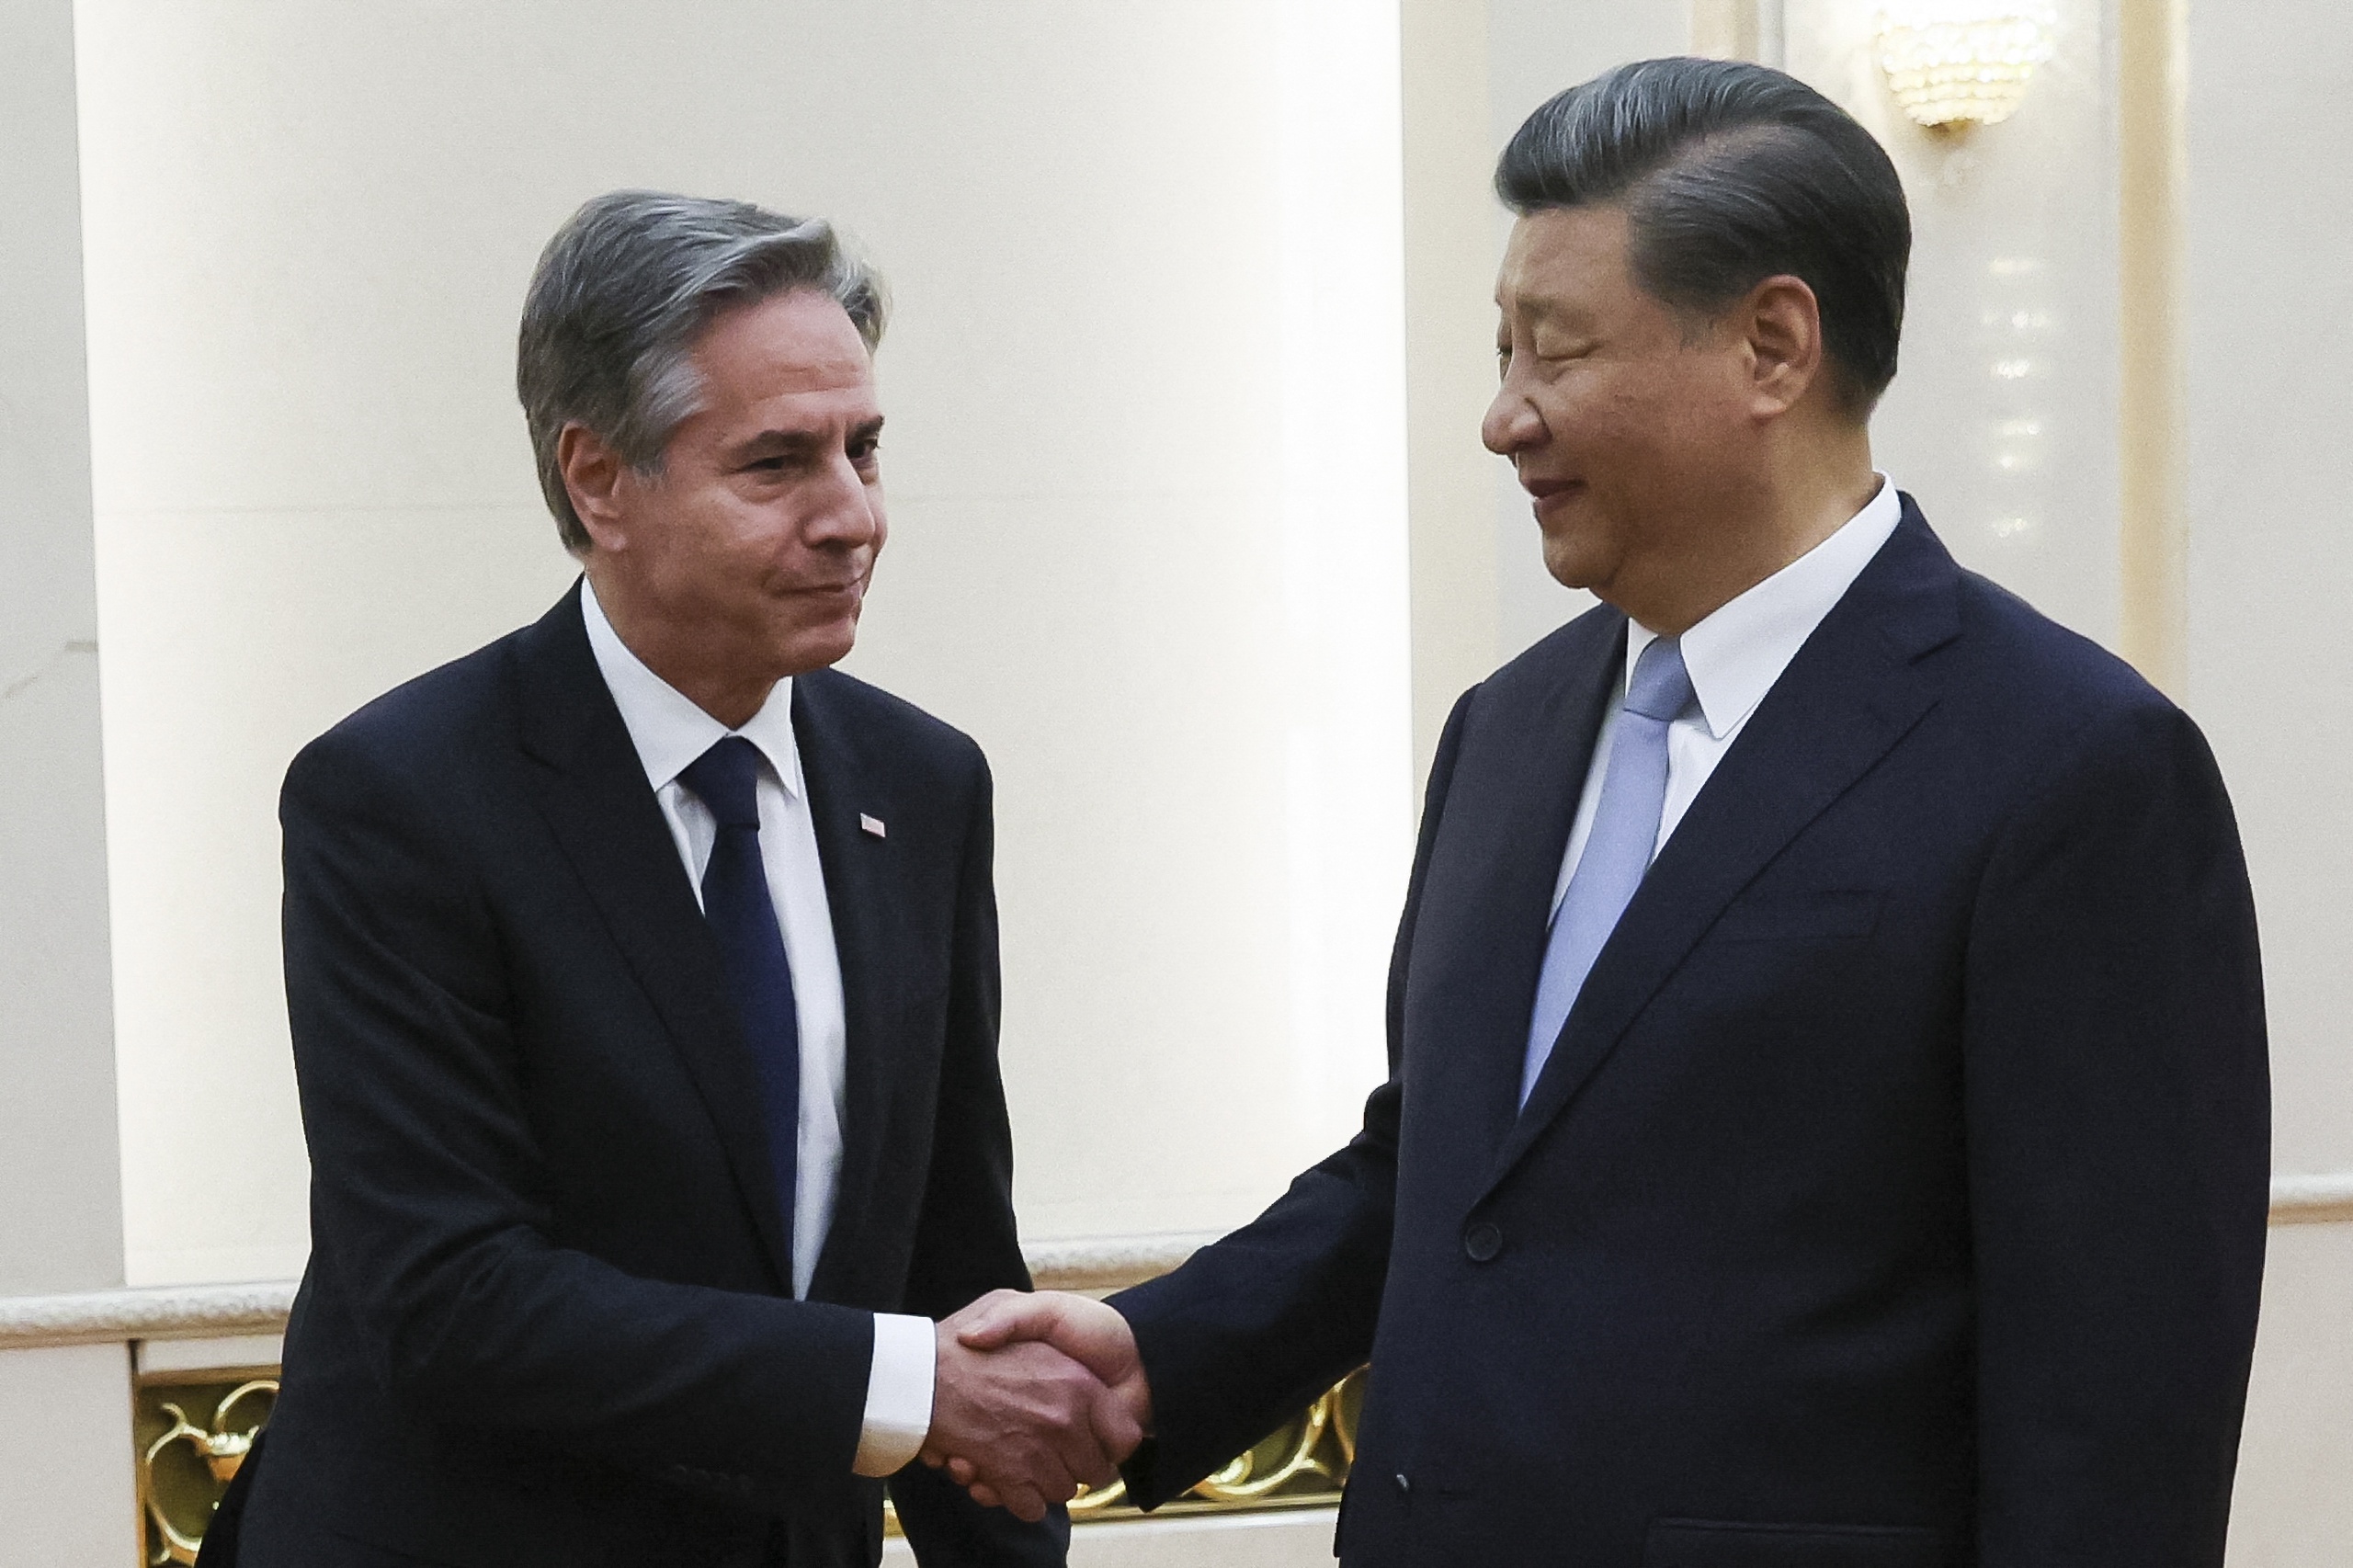 US Secretary of State Anthony Blinken met with Chinese President Xi Jinping during his state visit.  China's president has introduced a new law to crack down on America.  on Saturday, 